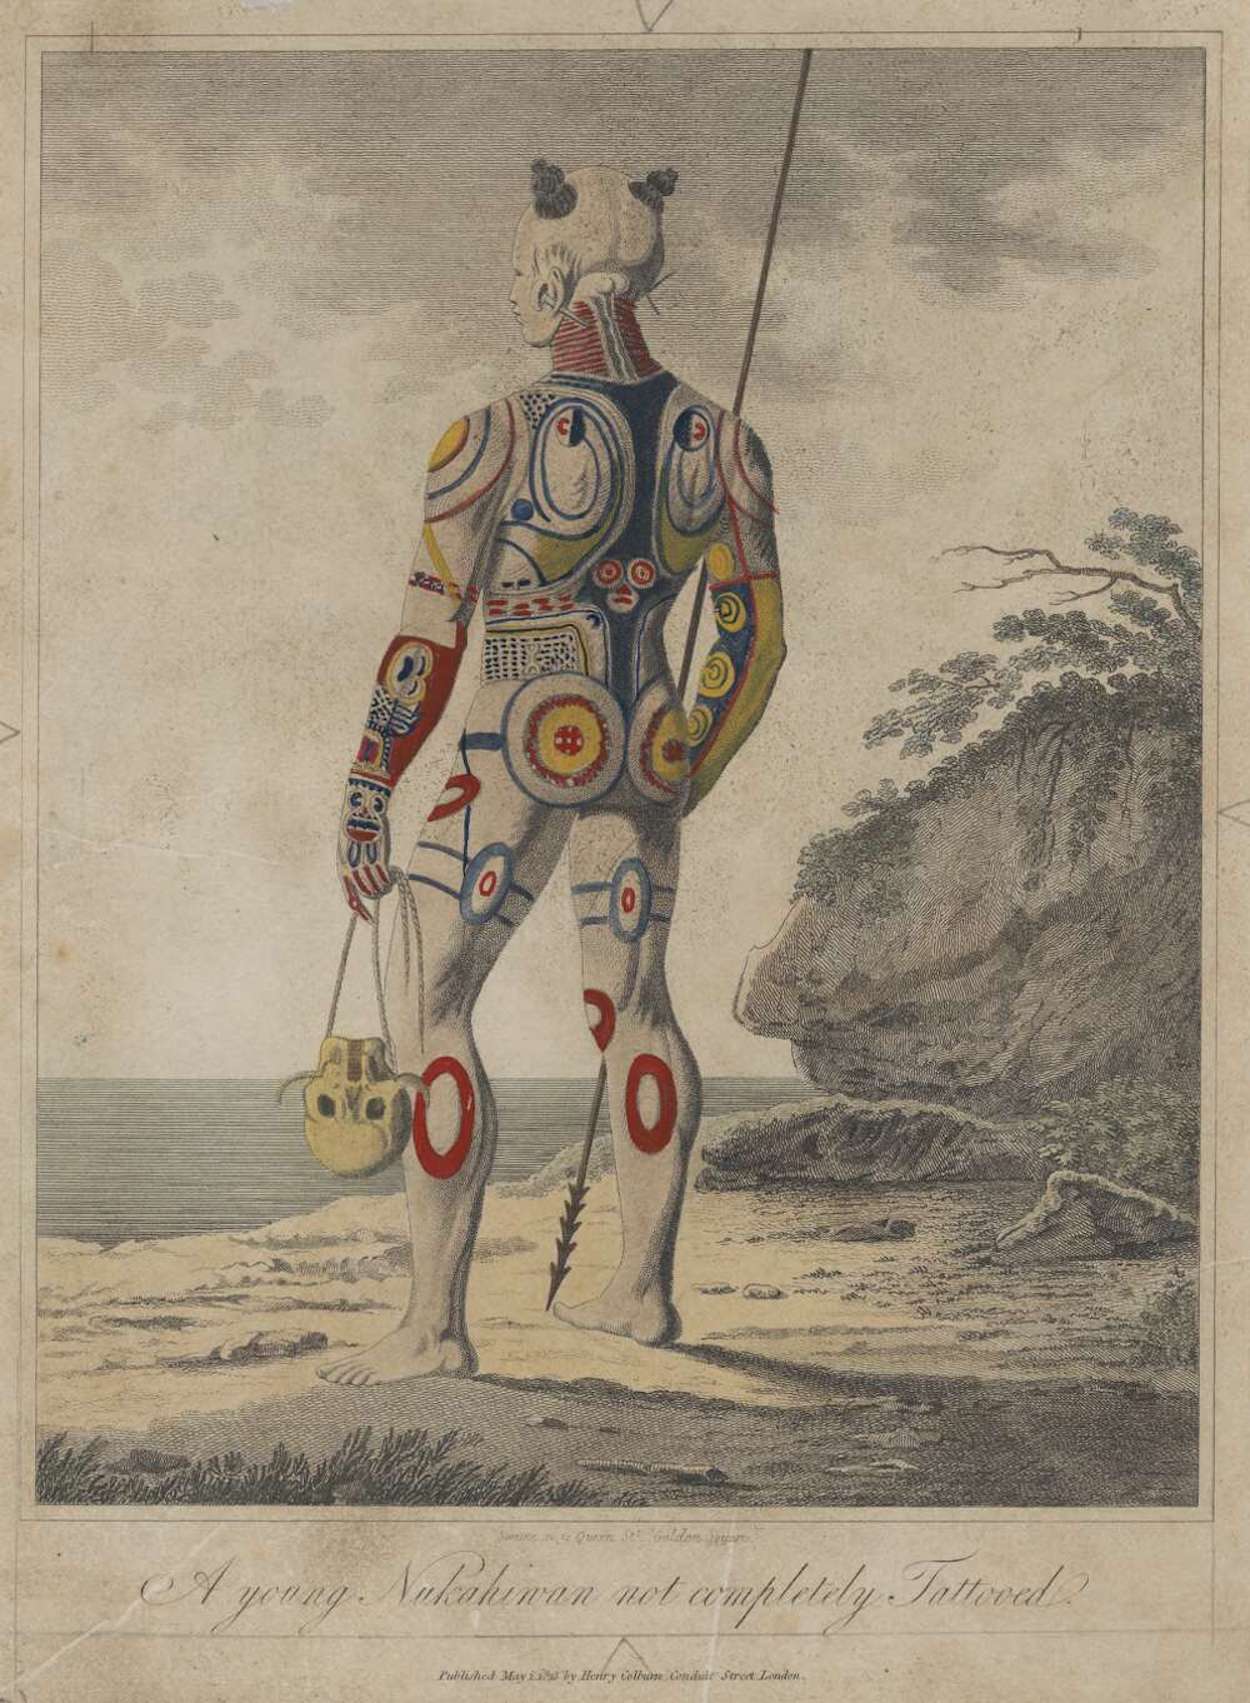 A Young Nukahiwan Not Completely Tattooed by John Swaine - 1813 - 26.4 x 20 cm private collection